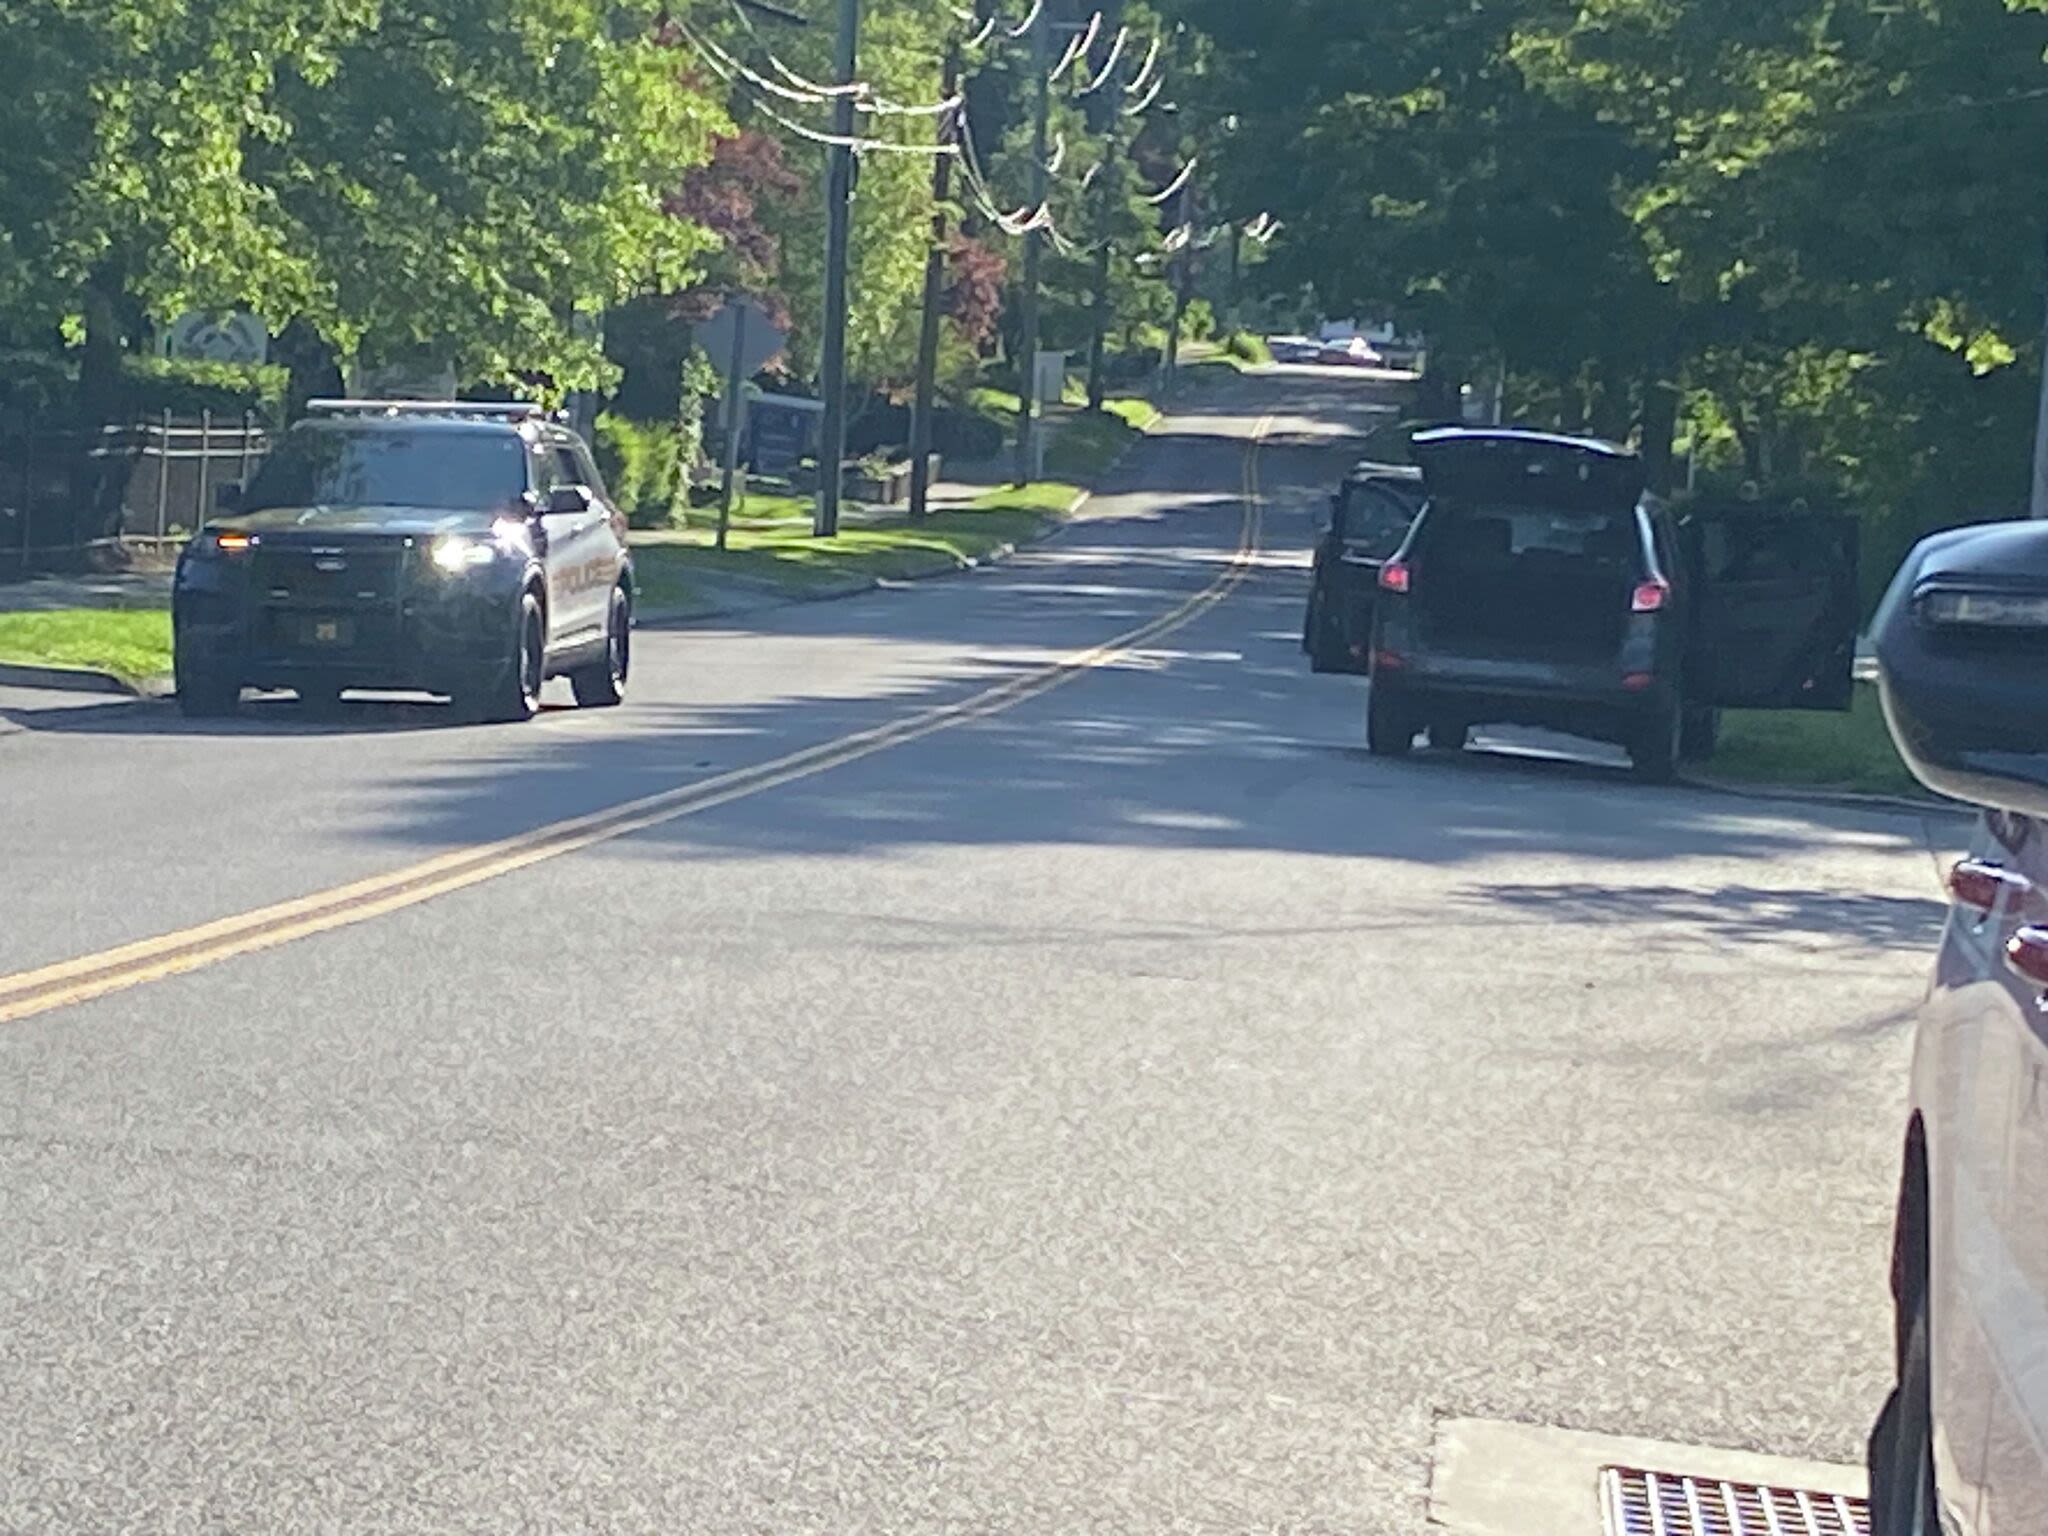 Kidnapping of juvenile sparks chase in Wilton and Ridgefield before crash and 4 arrests, police say